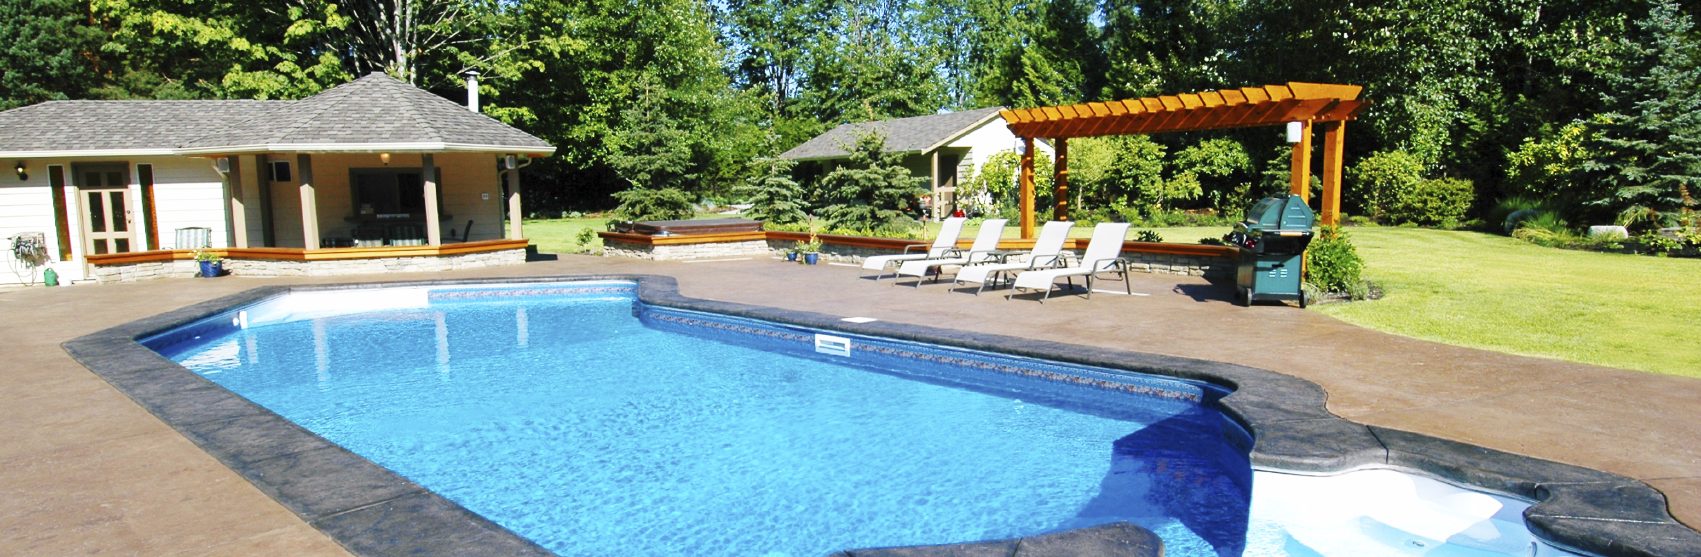 Pool Closing Tips to Prepare for Winter